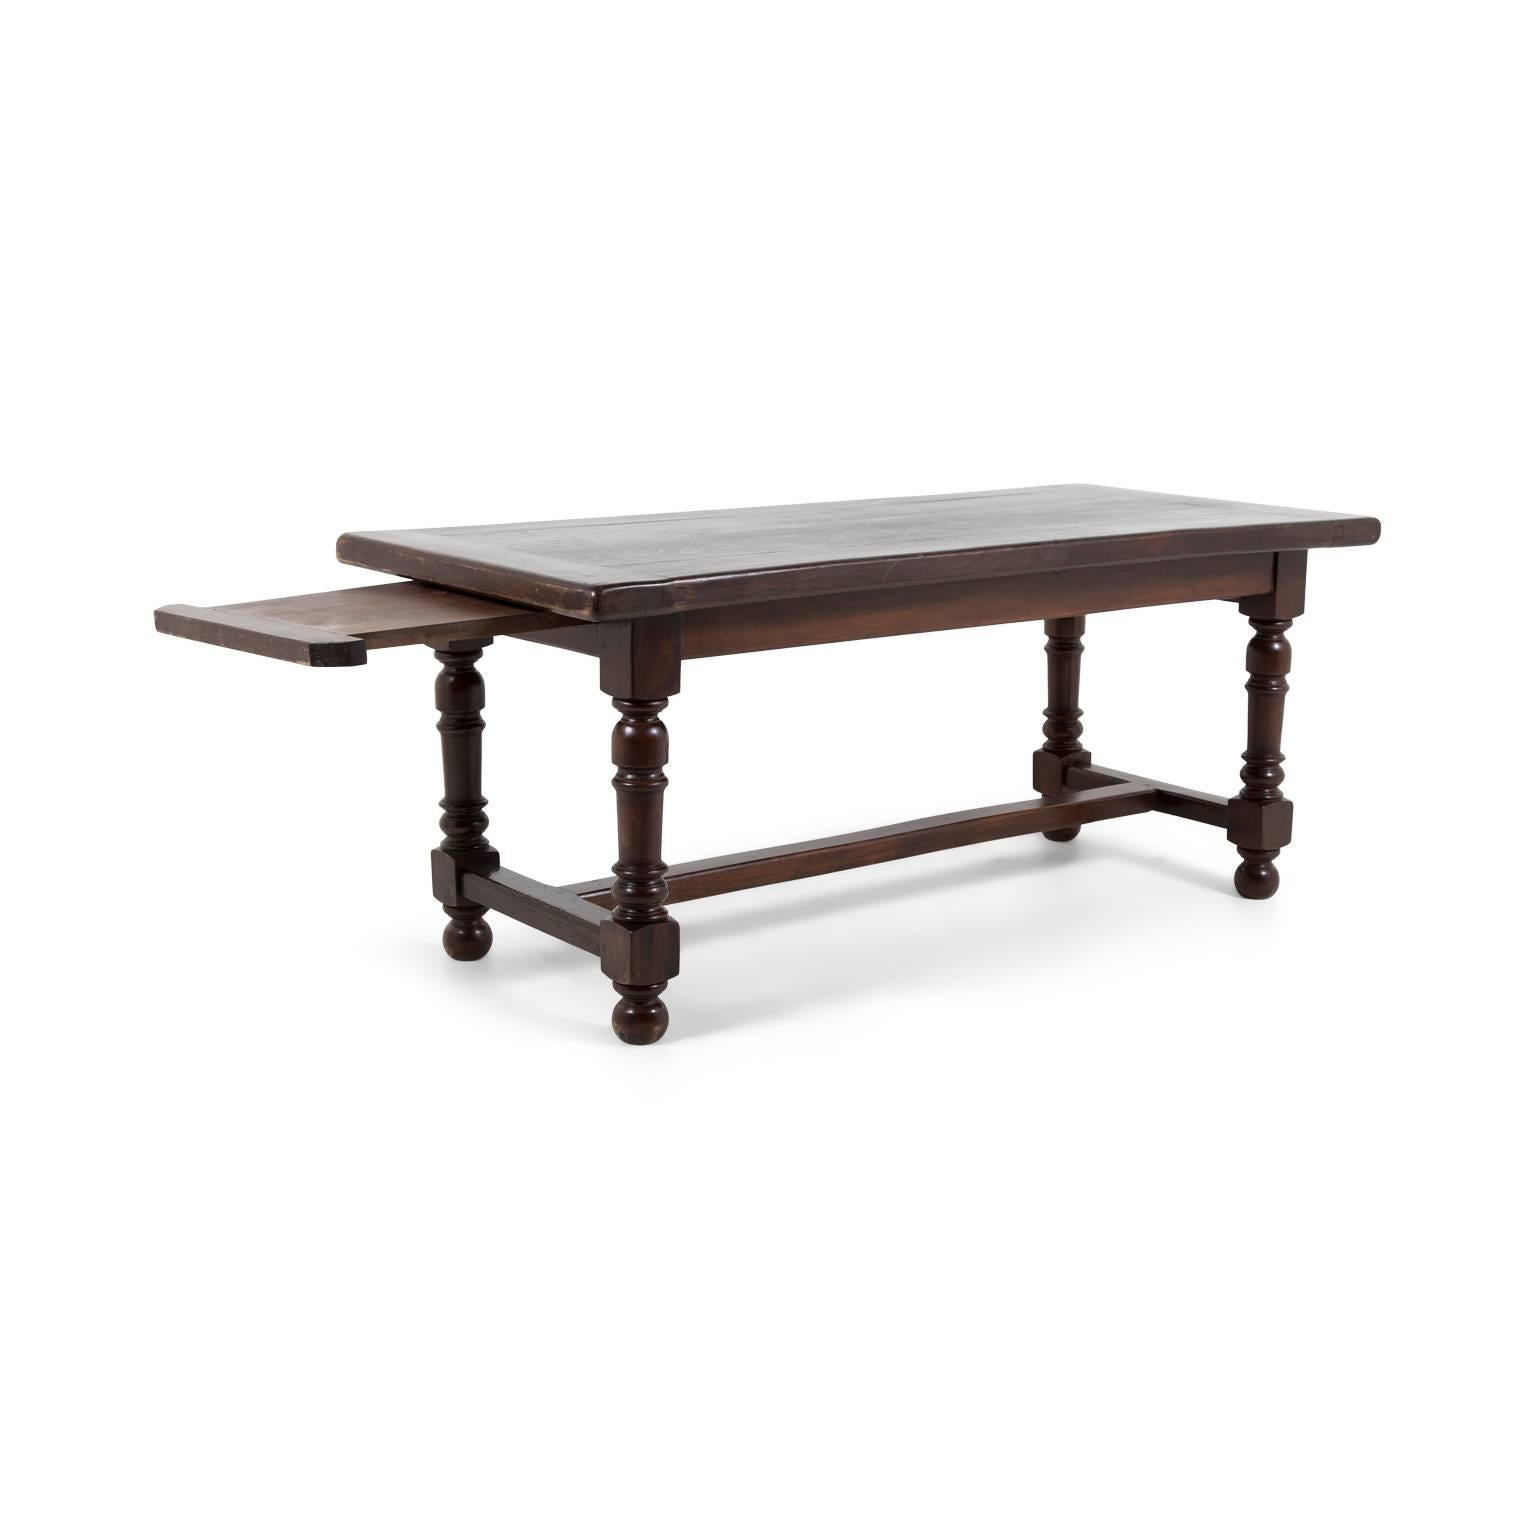 Country French Solid Oak Farm Table